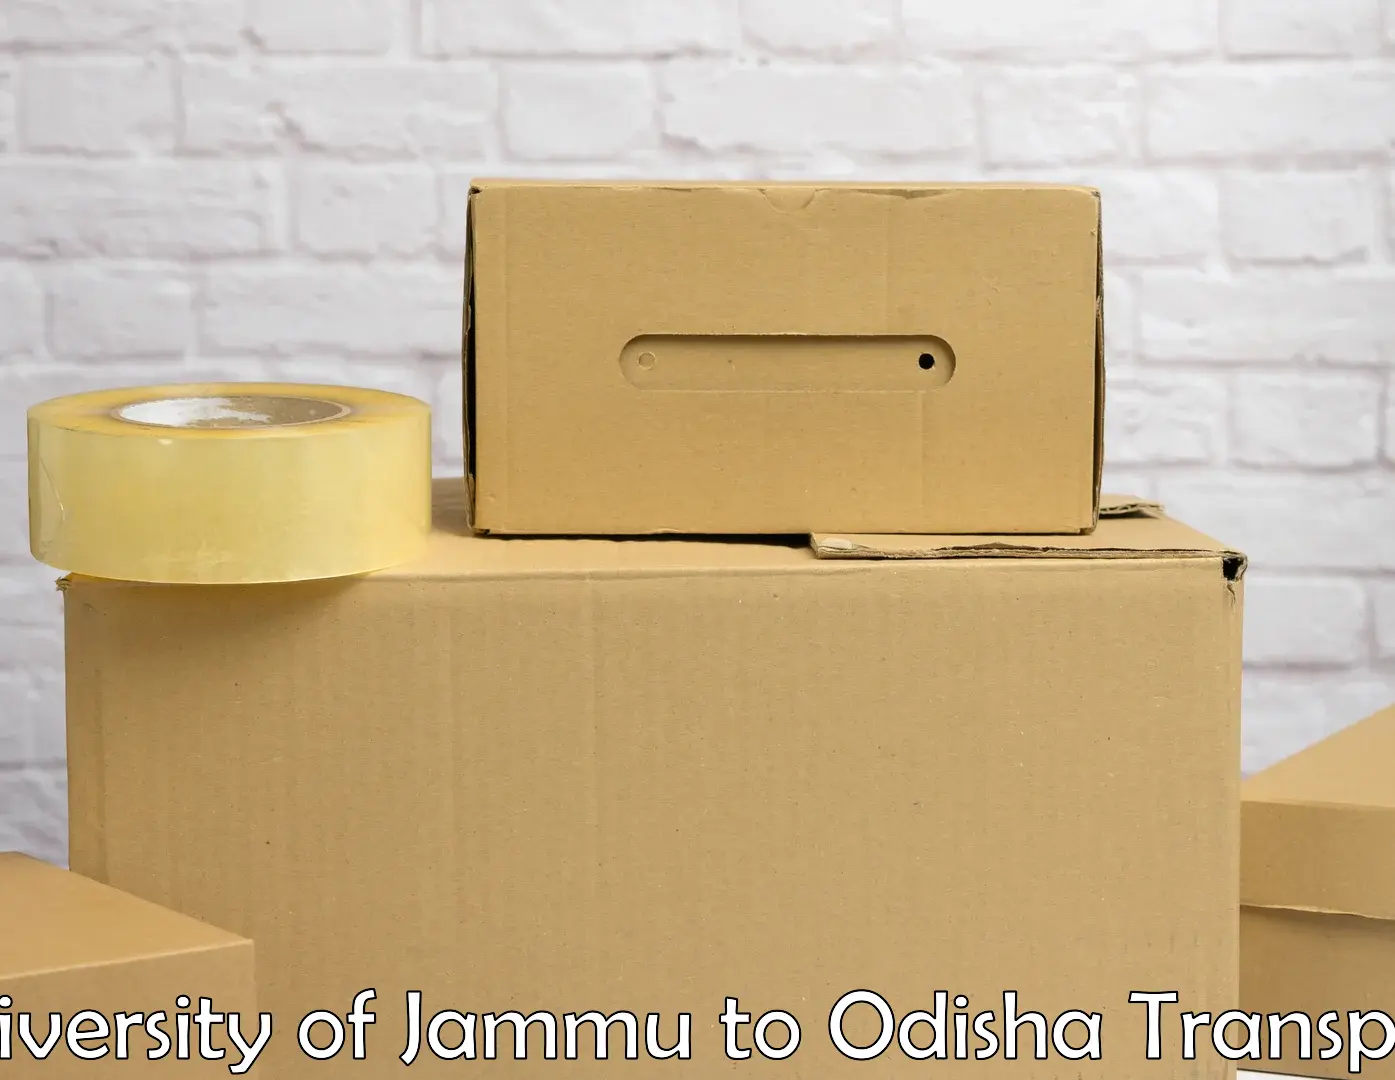 Container transportation services University of Jammu to Khordha